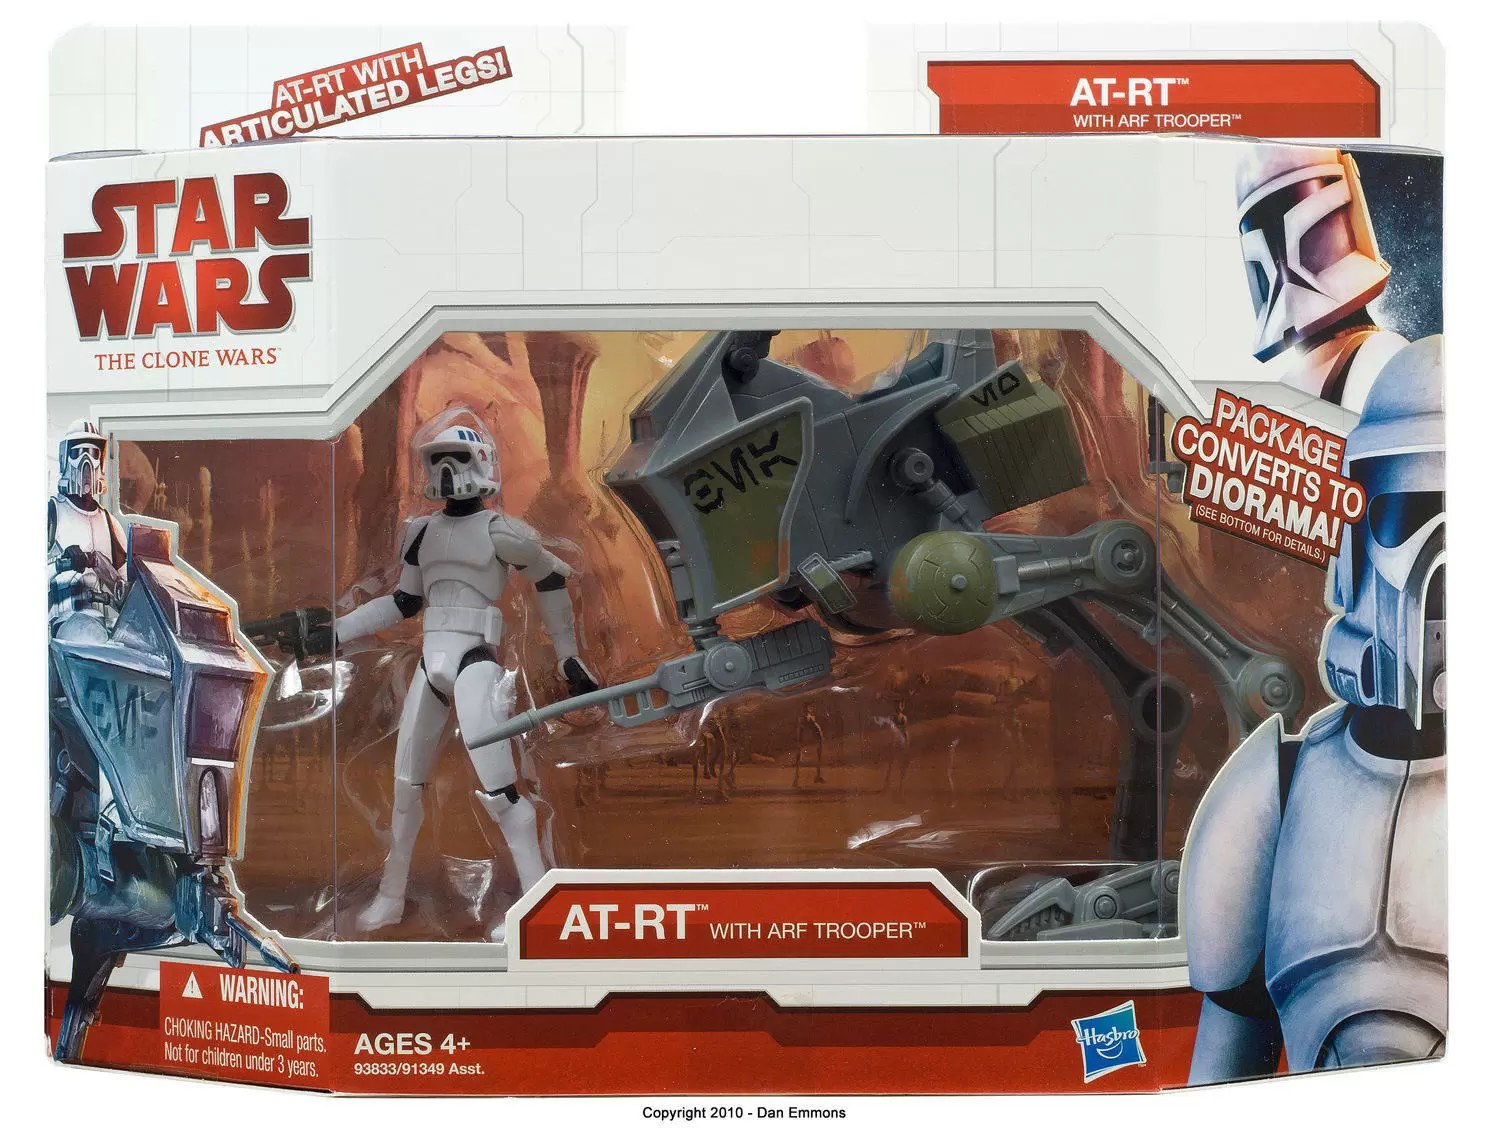 The Clone Wars (TCW 2009) - AT-RT with ARF Trooper